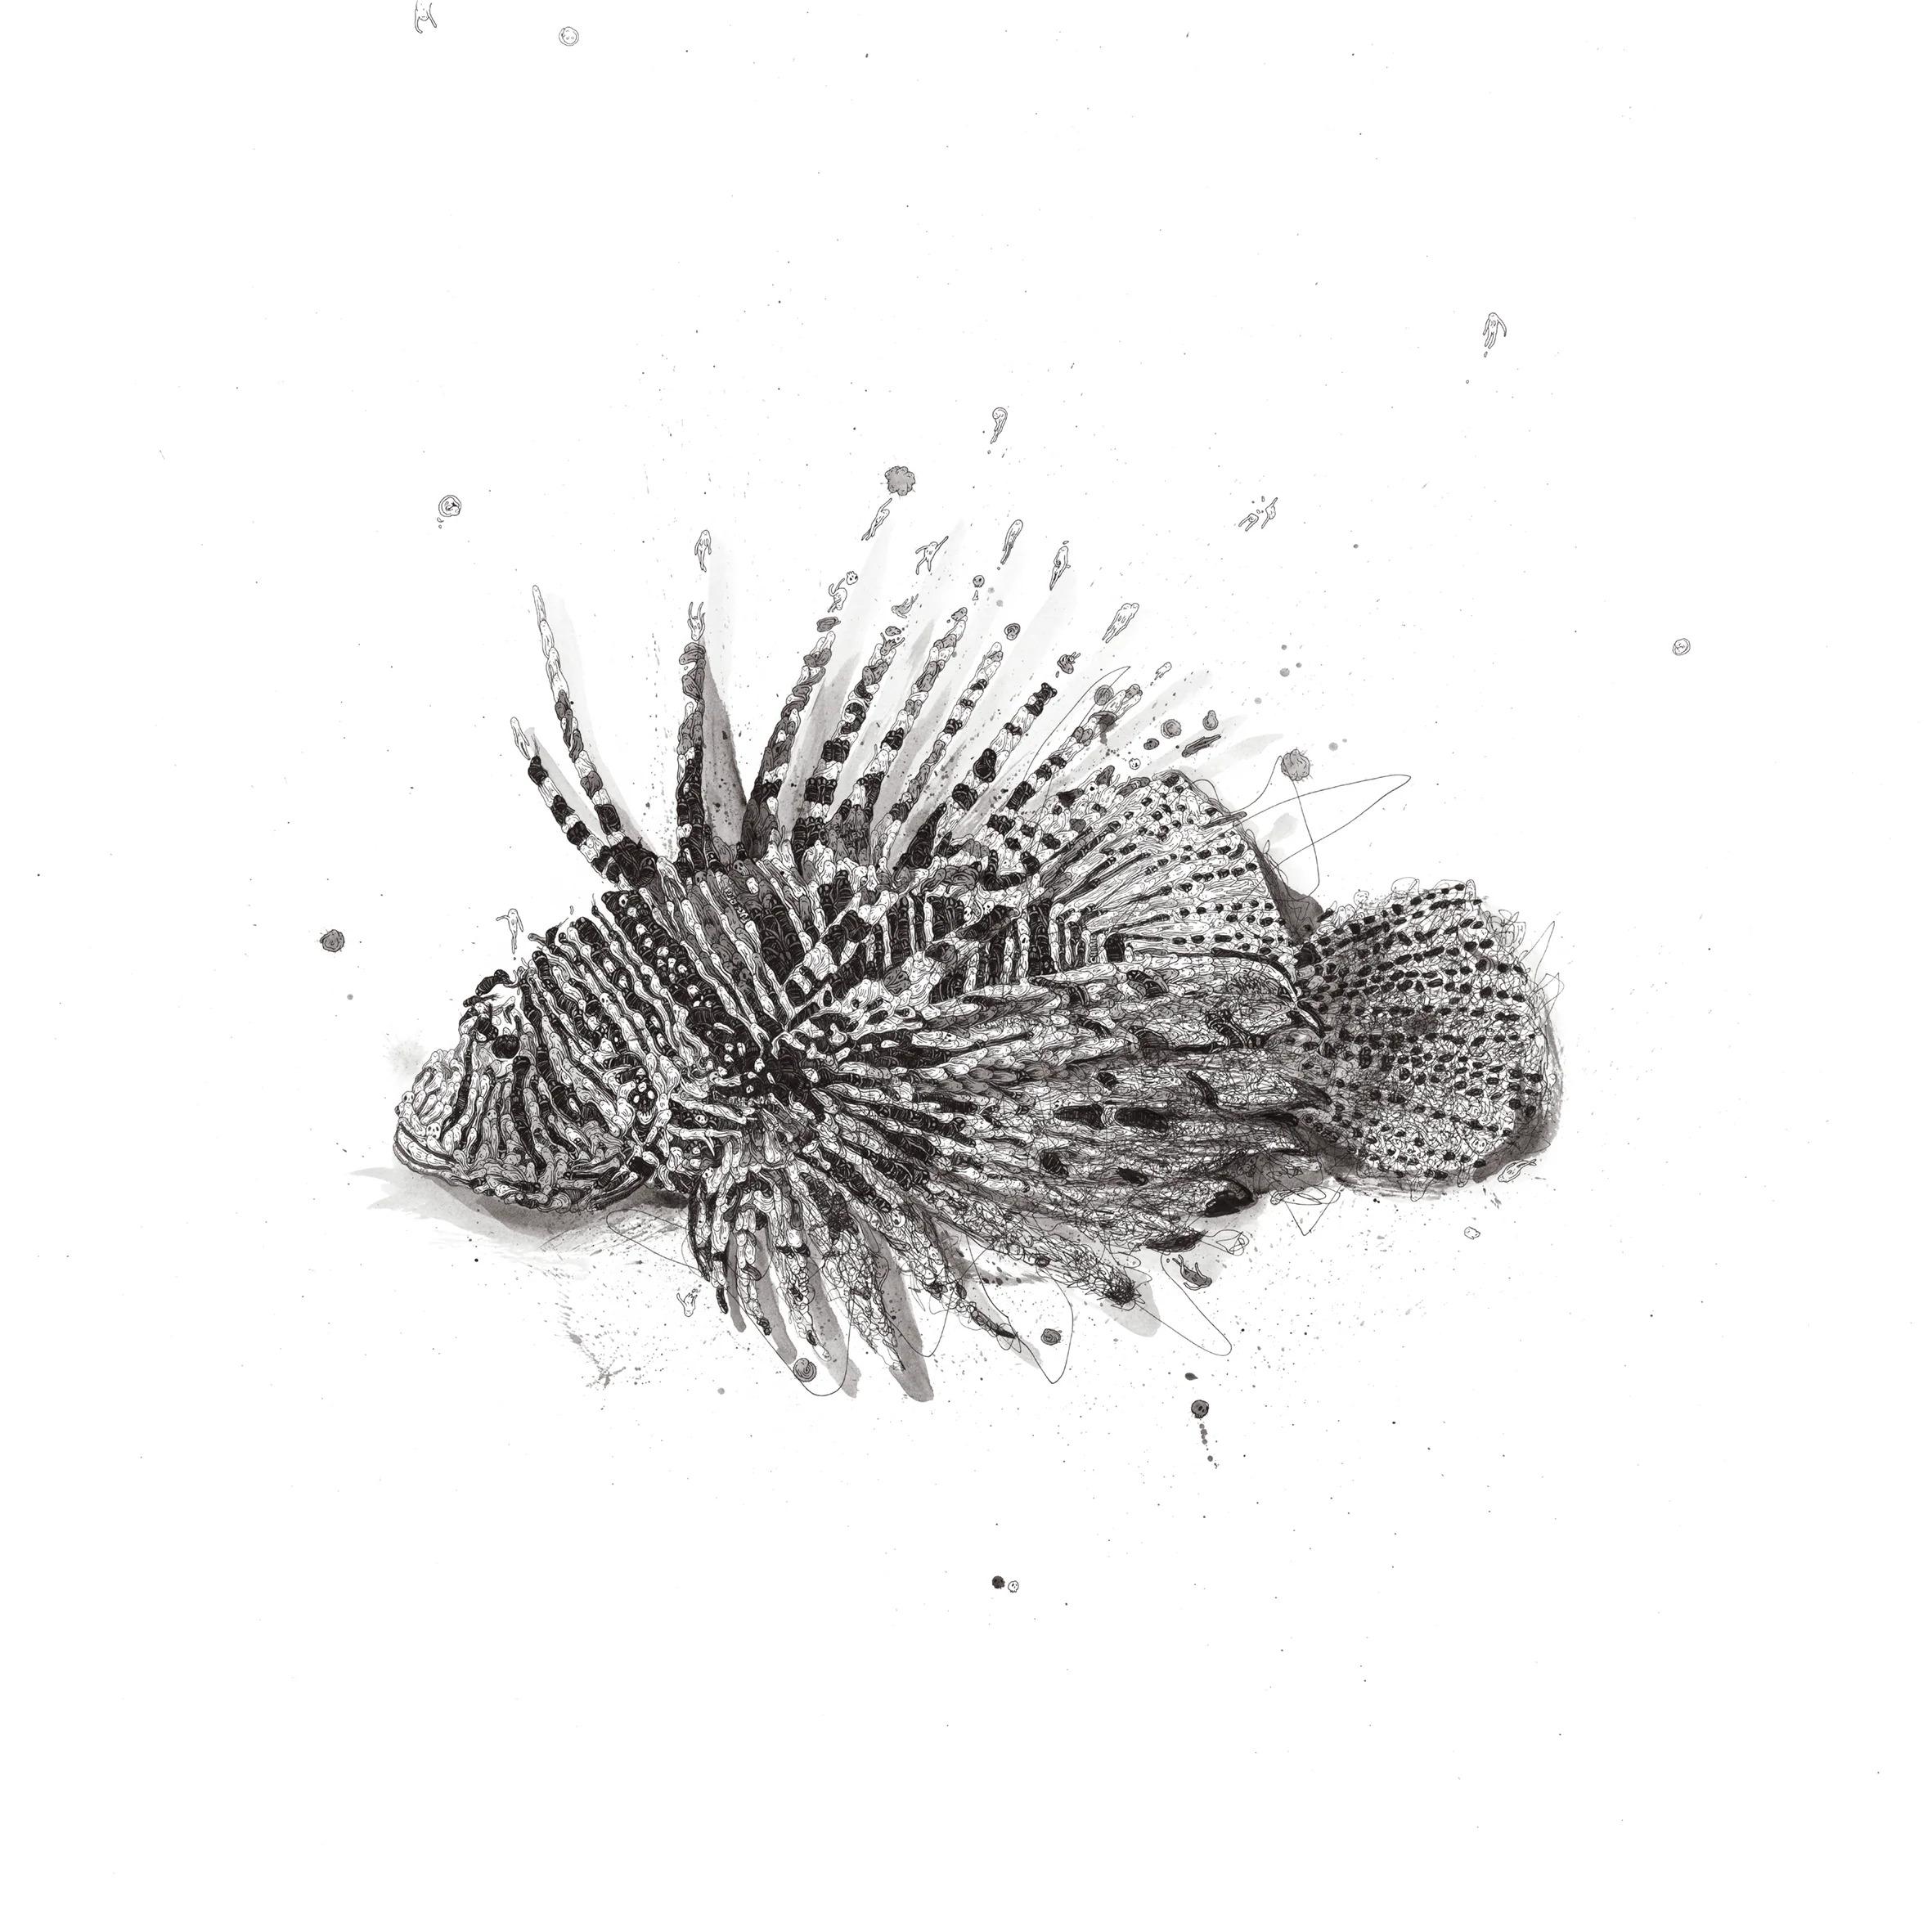 Richard Berner, Lionfish of Destiny (Signed)

Giclee print on 330gsm Somerset Paper

60 x 60 cm (23.62 x 23.62 in)

Signed and numbered by the artist

Edition of 25